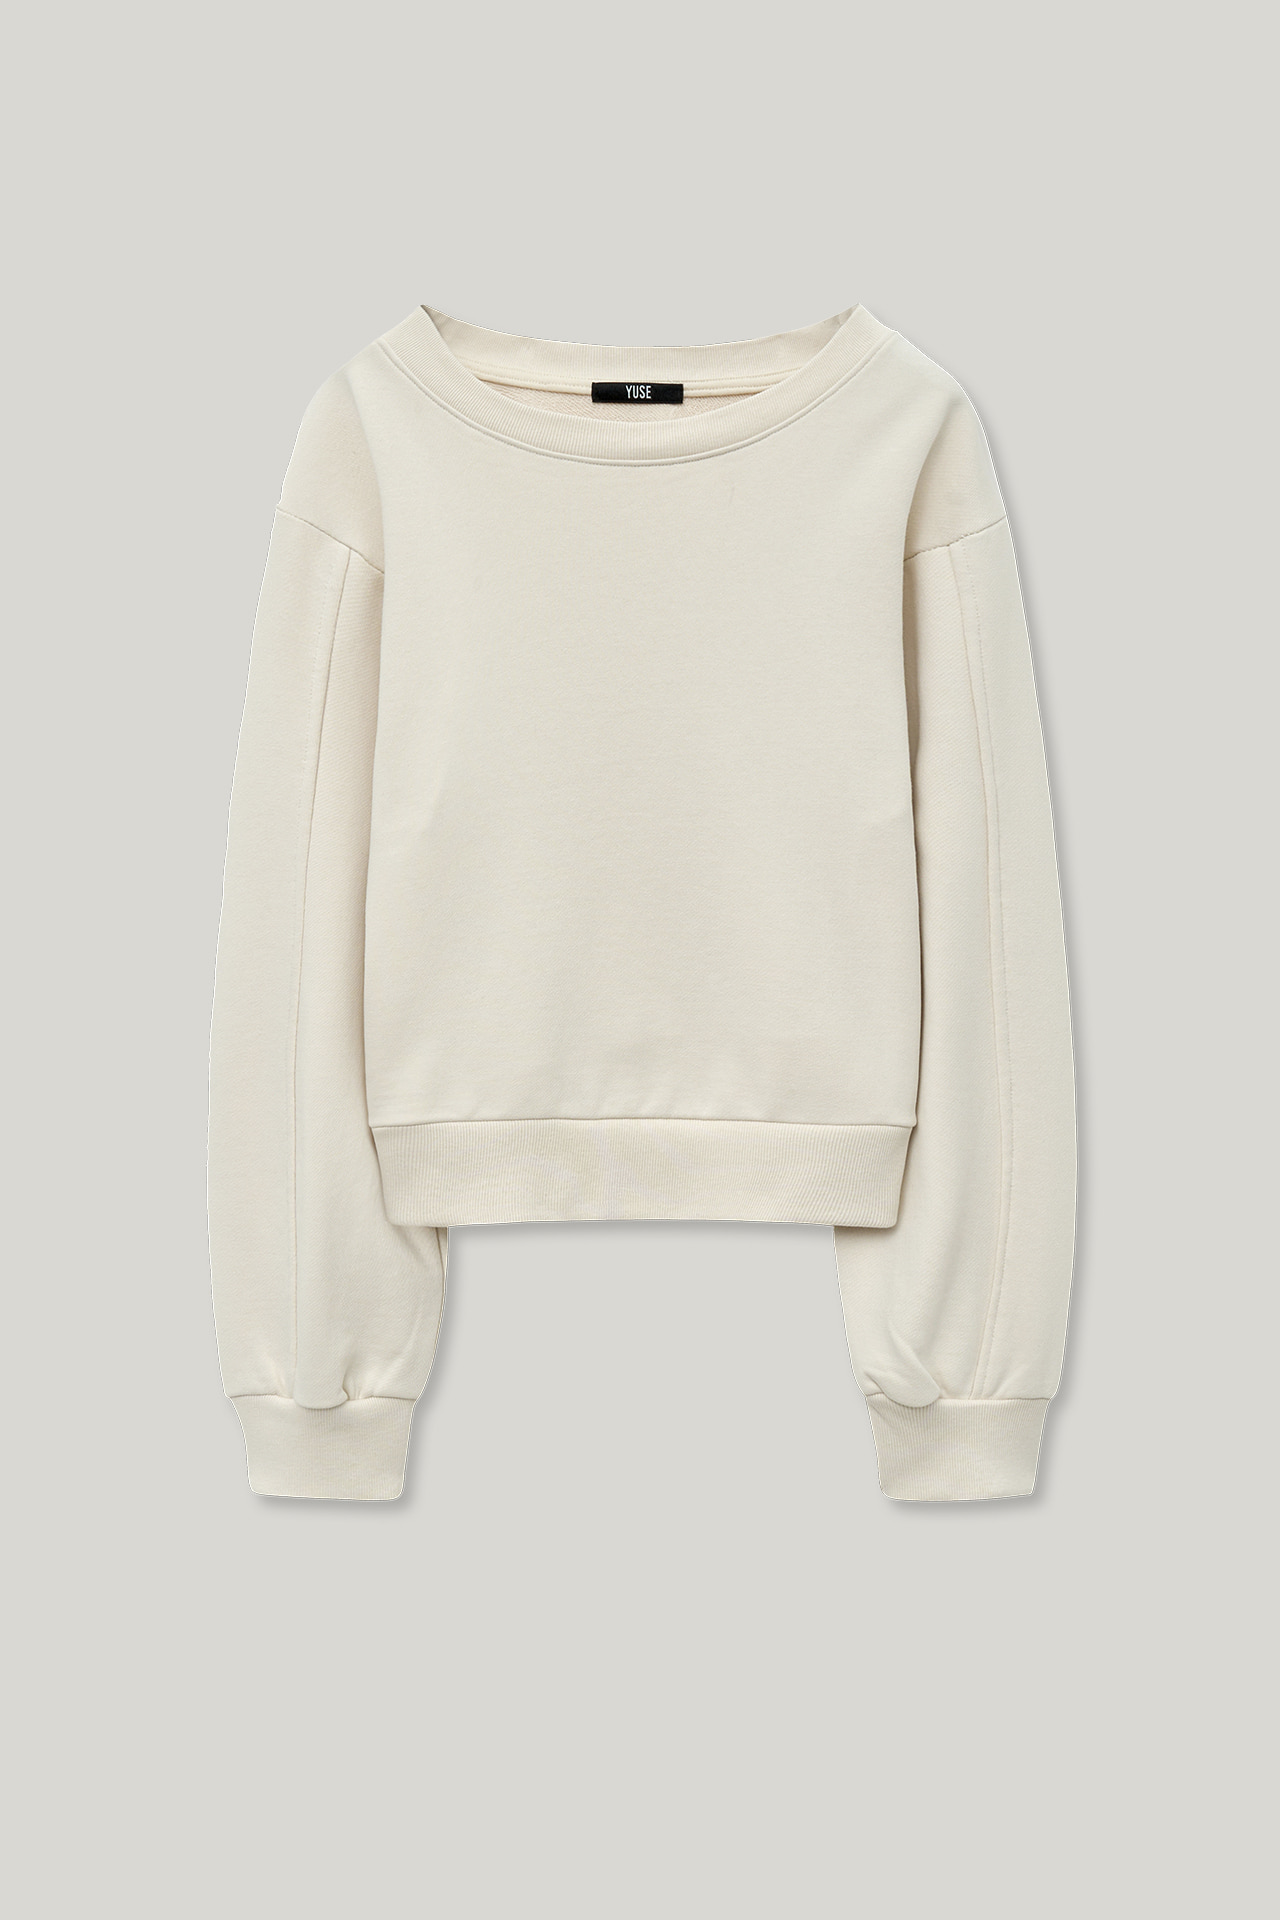 [RE:YUSE] BASIC RECYCLE OFF SHOULDER SWEAT SHIRT TOP - CREAM